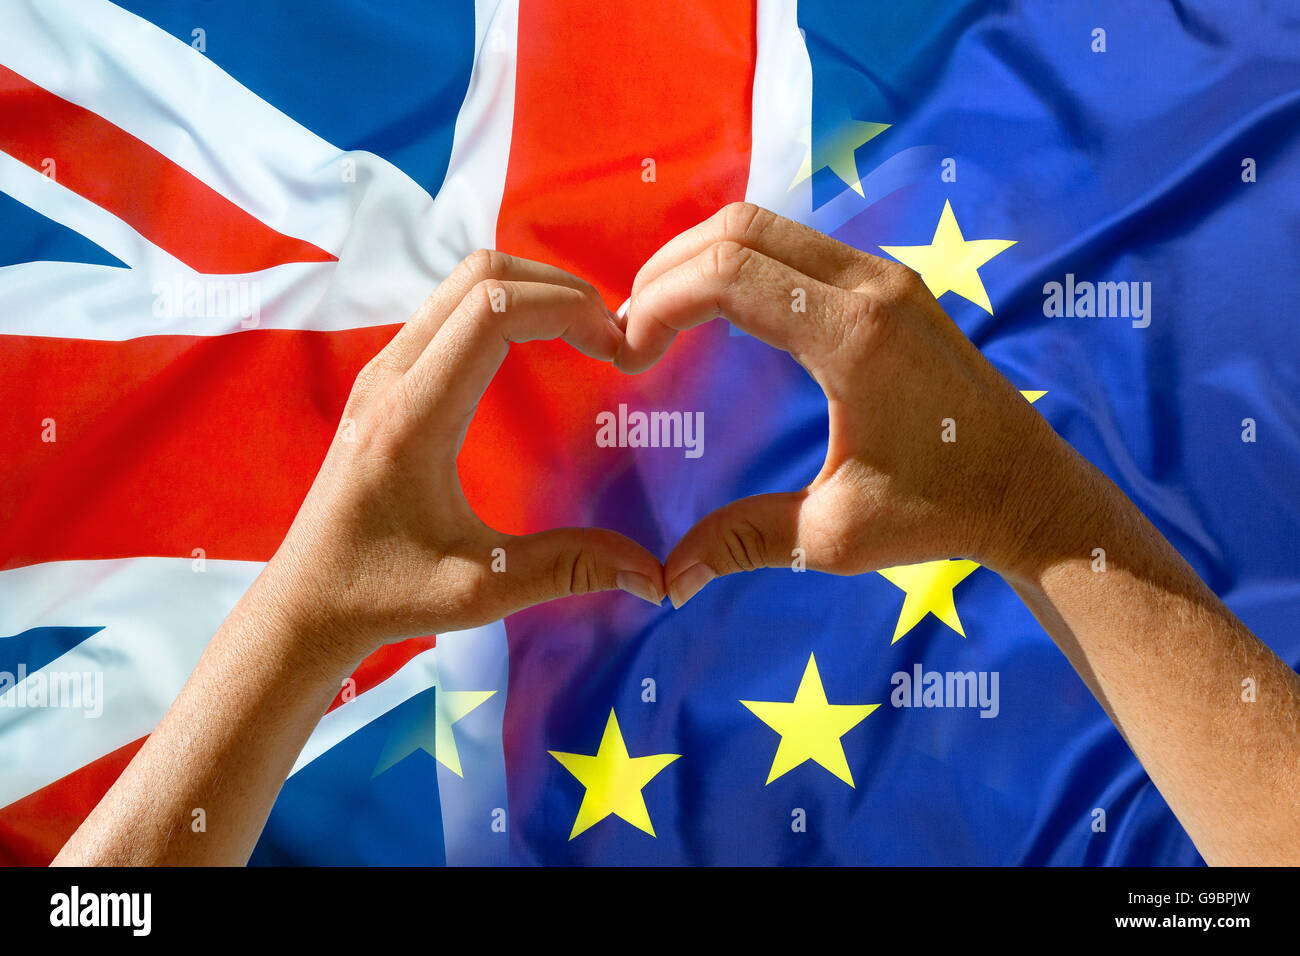 Hands heart symbol, exit Great Britain from European Union flags in background Stock Photo